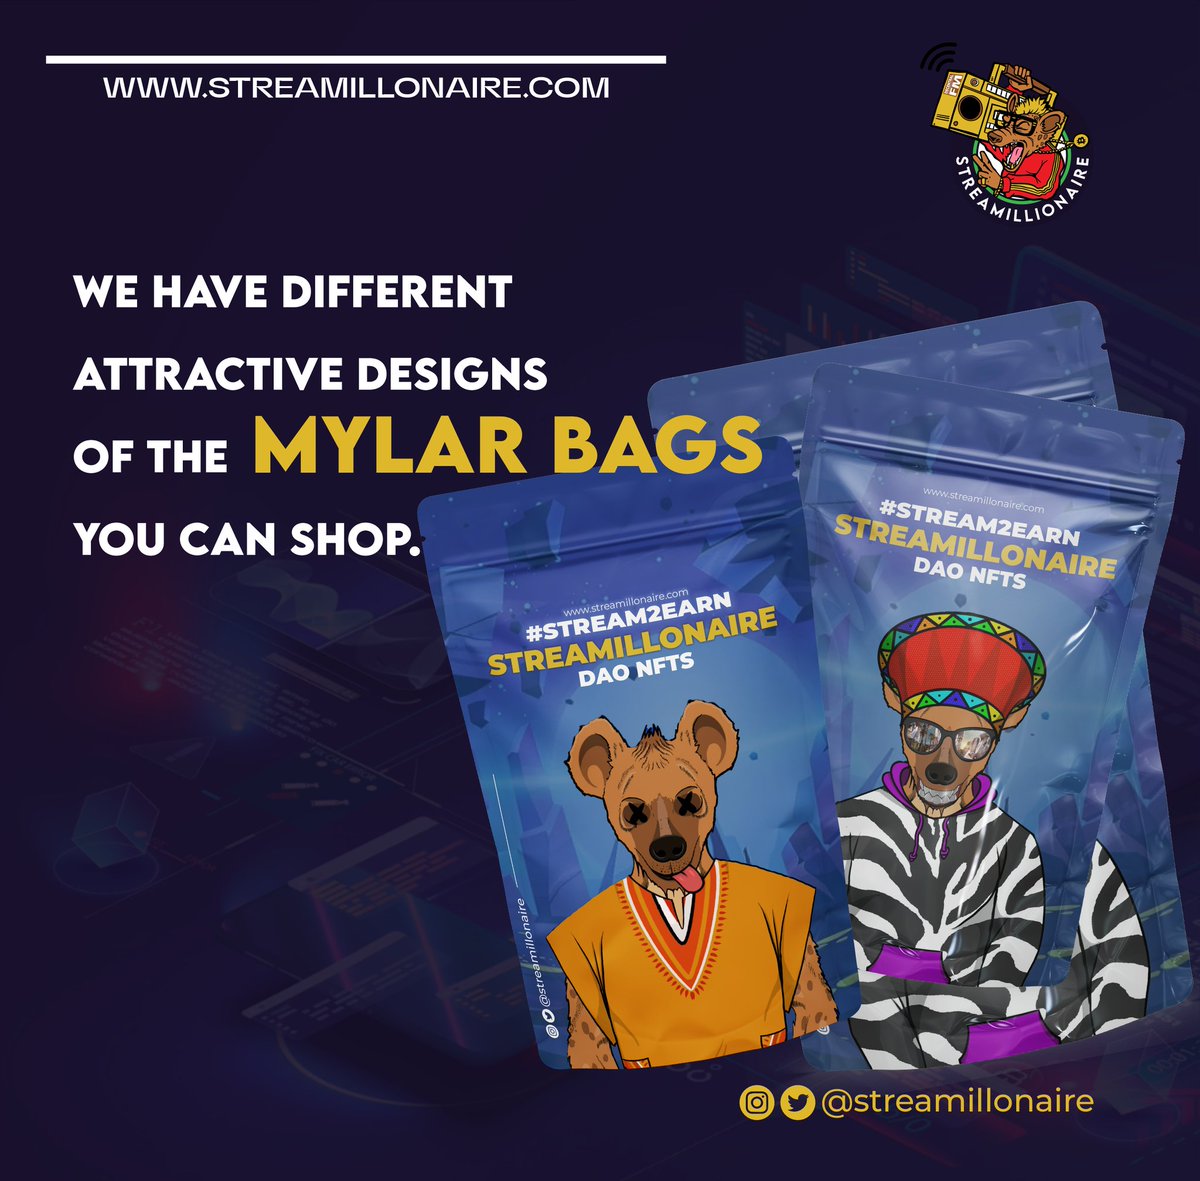 Visit our website to shop various designs of our Mylar bags.

#streamillonaire #lagoslabs #mylarbags #techstartup #mylarbag #mylarbaglabels #mylarbagdesign #nftdesign #nftdesigns #nftdesigner